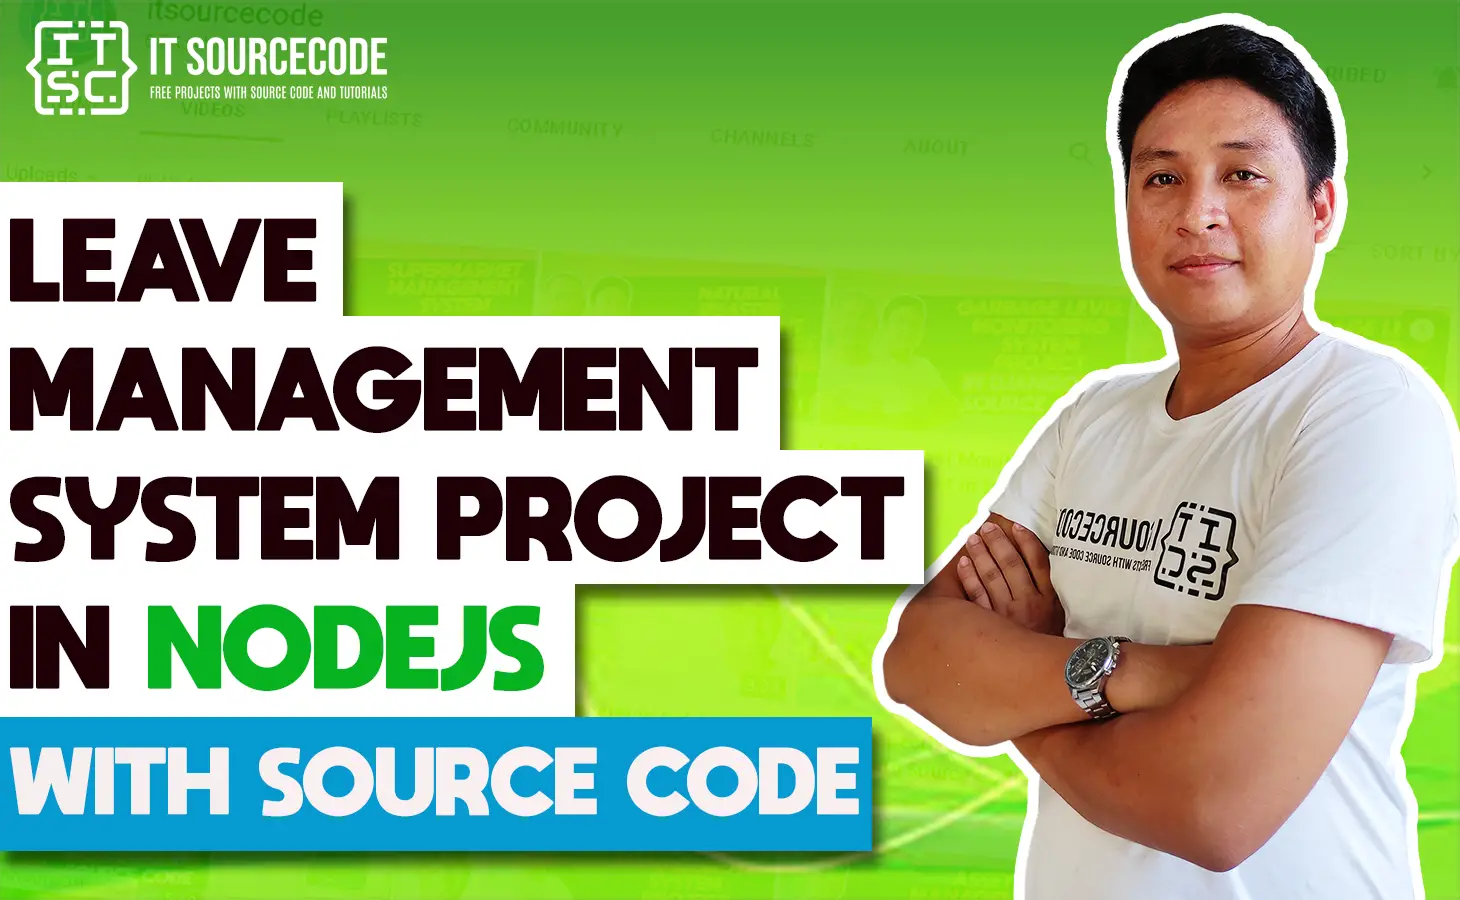 Leave Management System Project in Node JS with Source Code